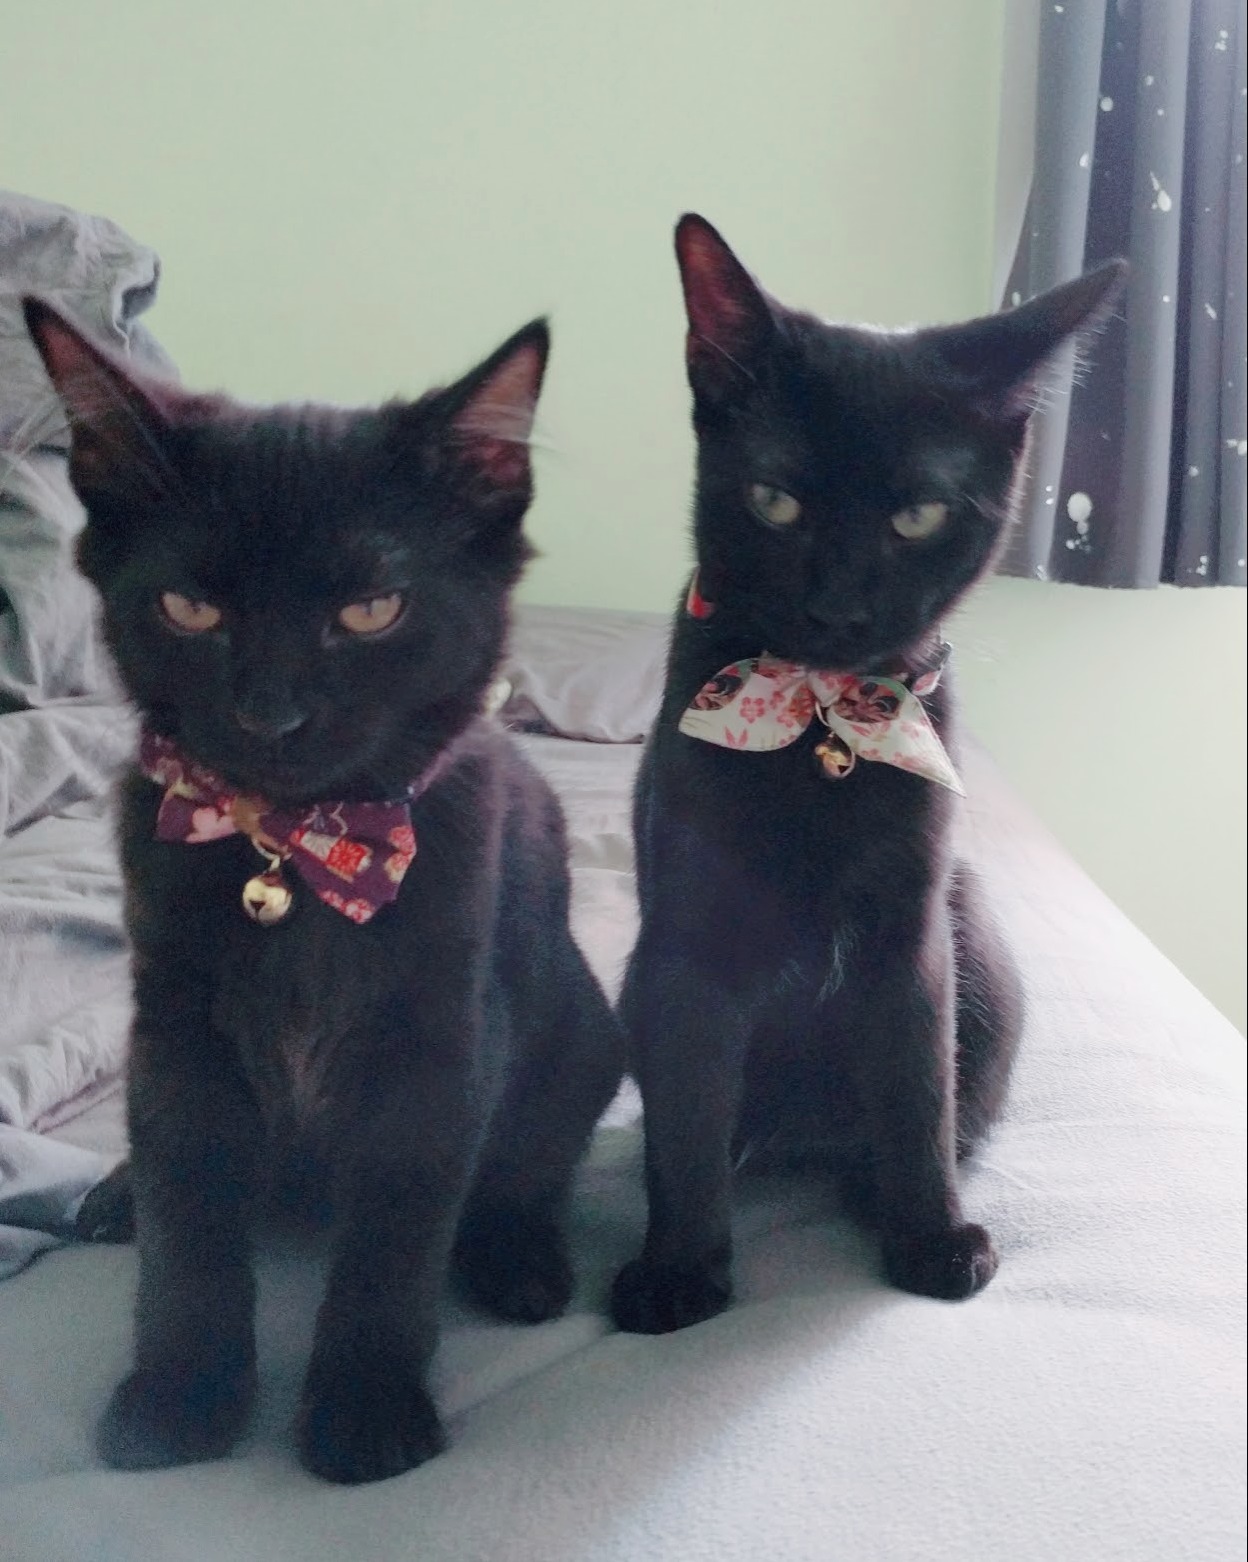 When your cats are tired of posing for pictures. x post rblackcats